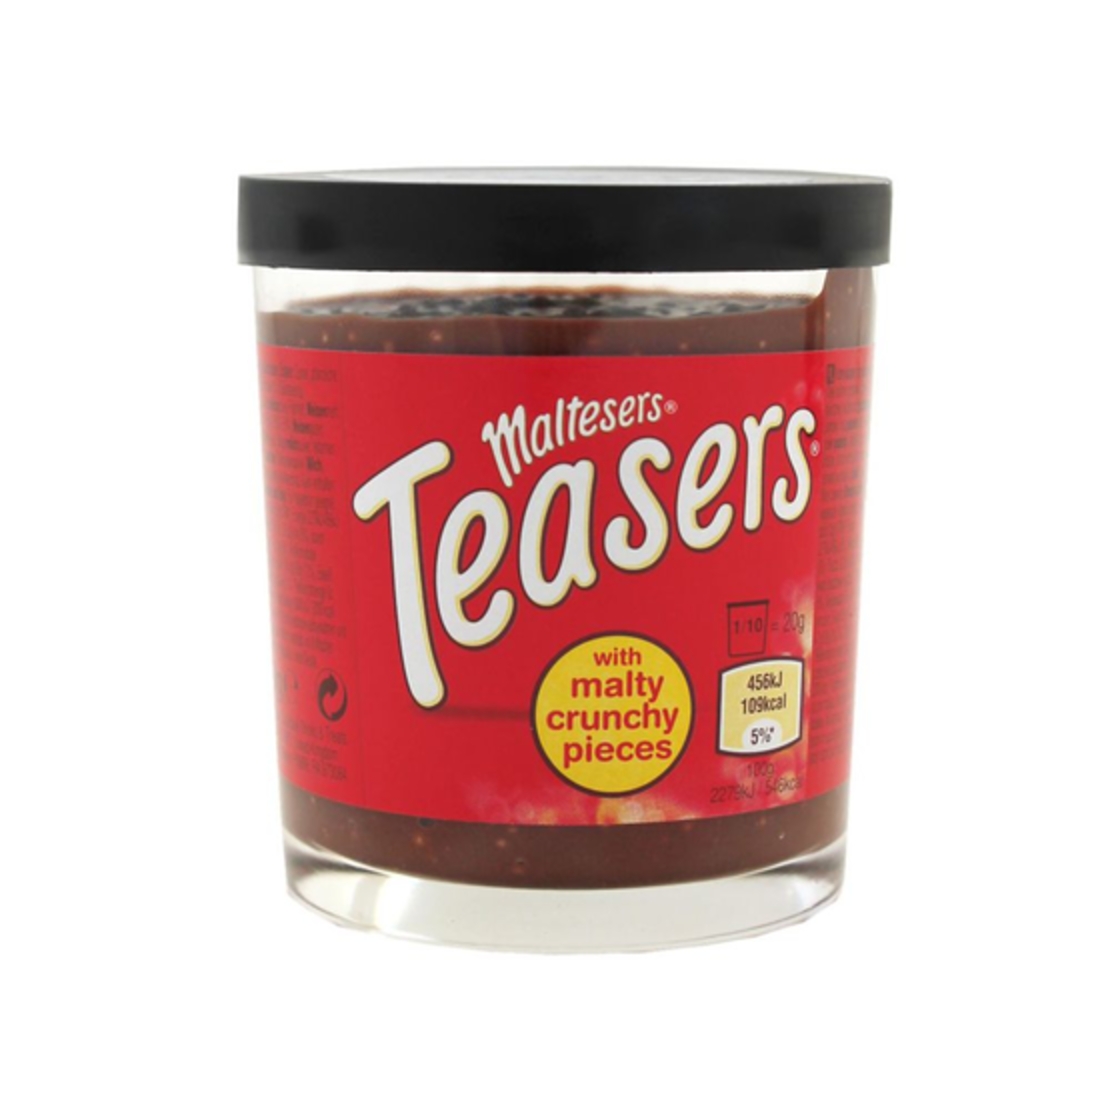 Maltesers with Crunchy Pieces Spread